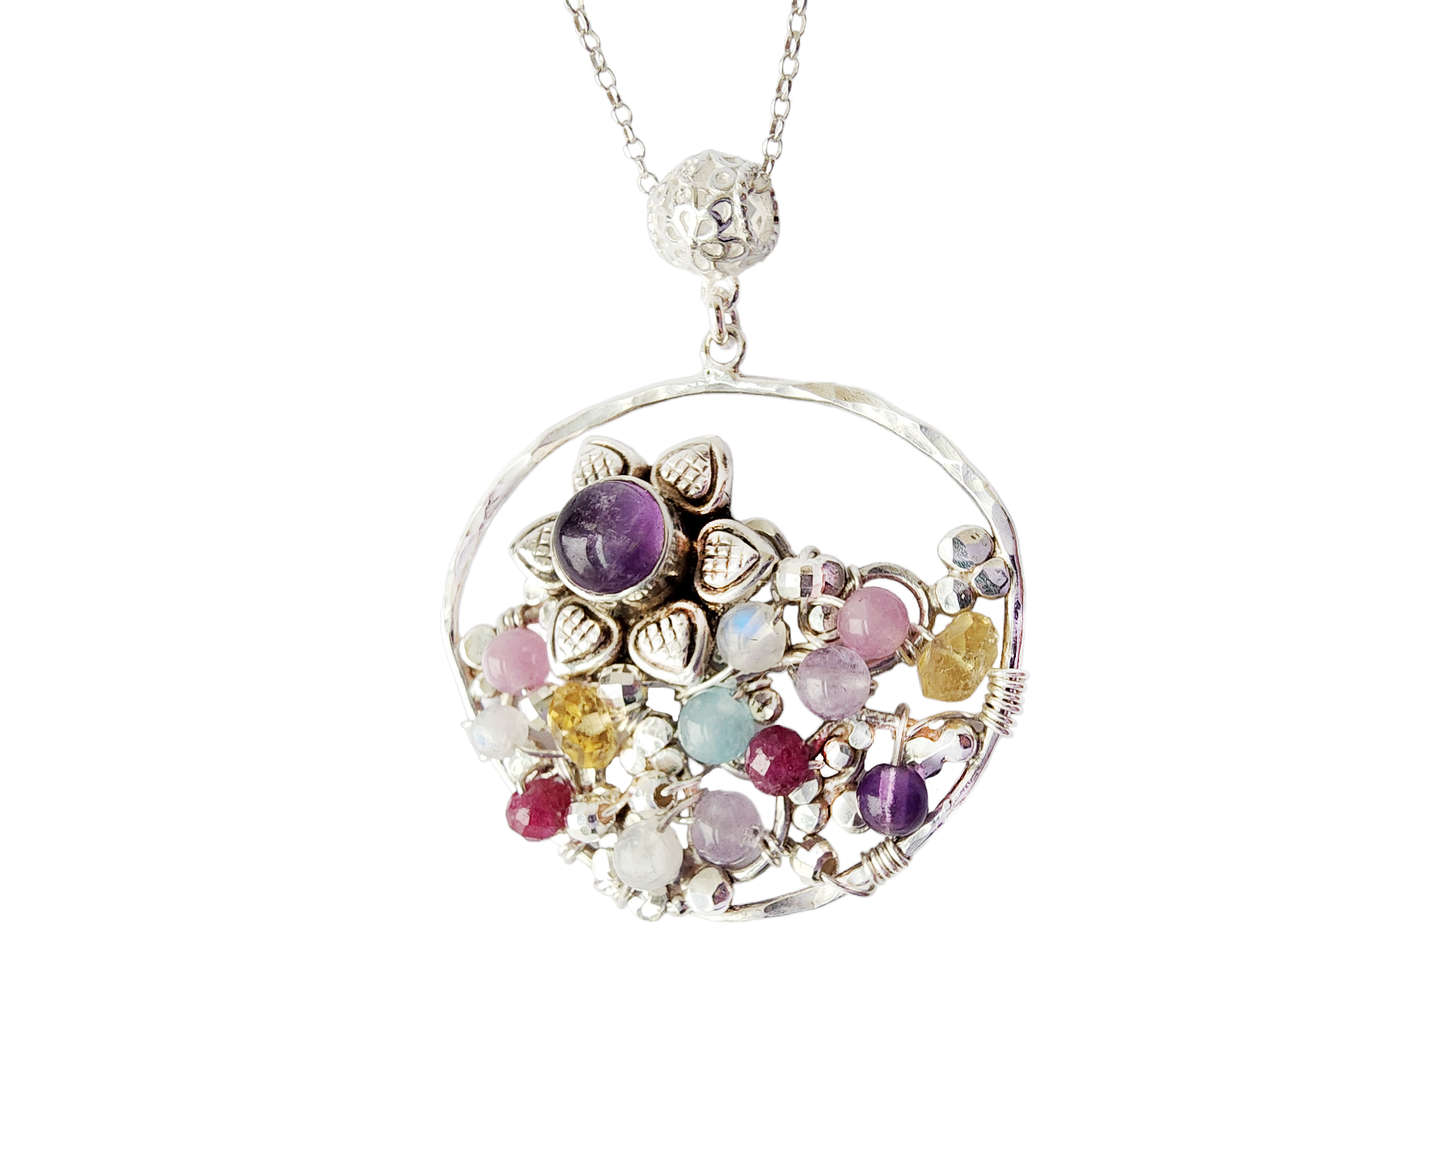 large round Sterling Silver Gemstone Garden inspired Pendant with Upcycled and new Gemstones and Sterling Silver. 